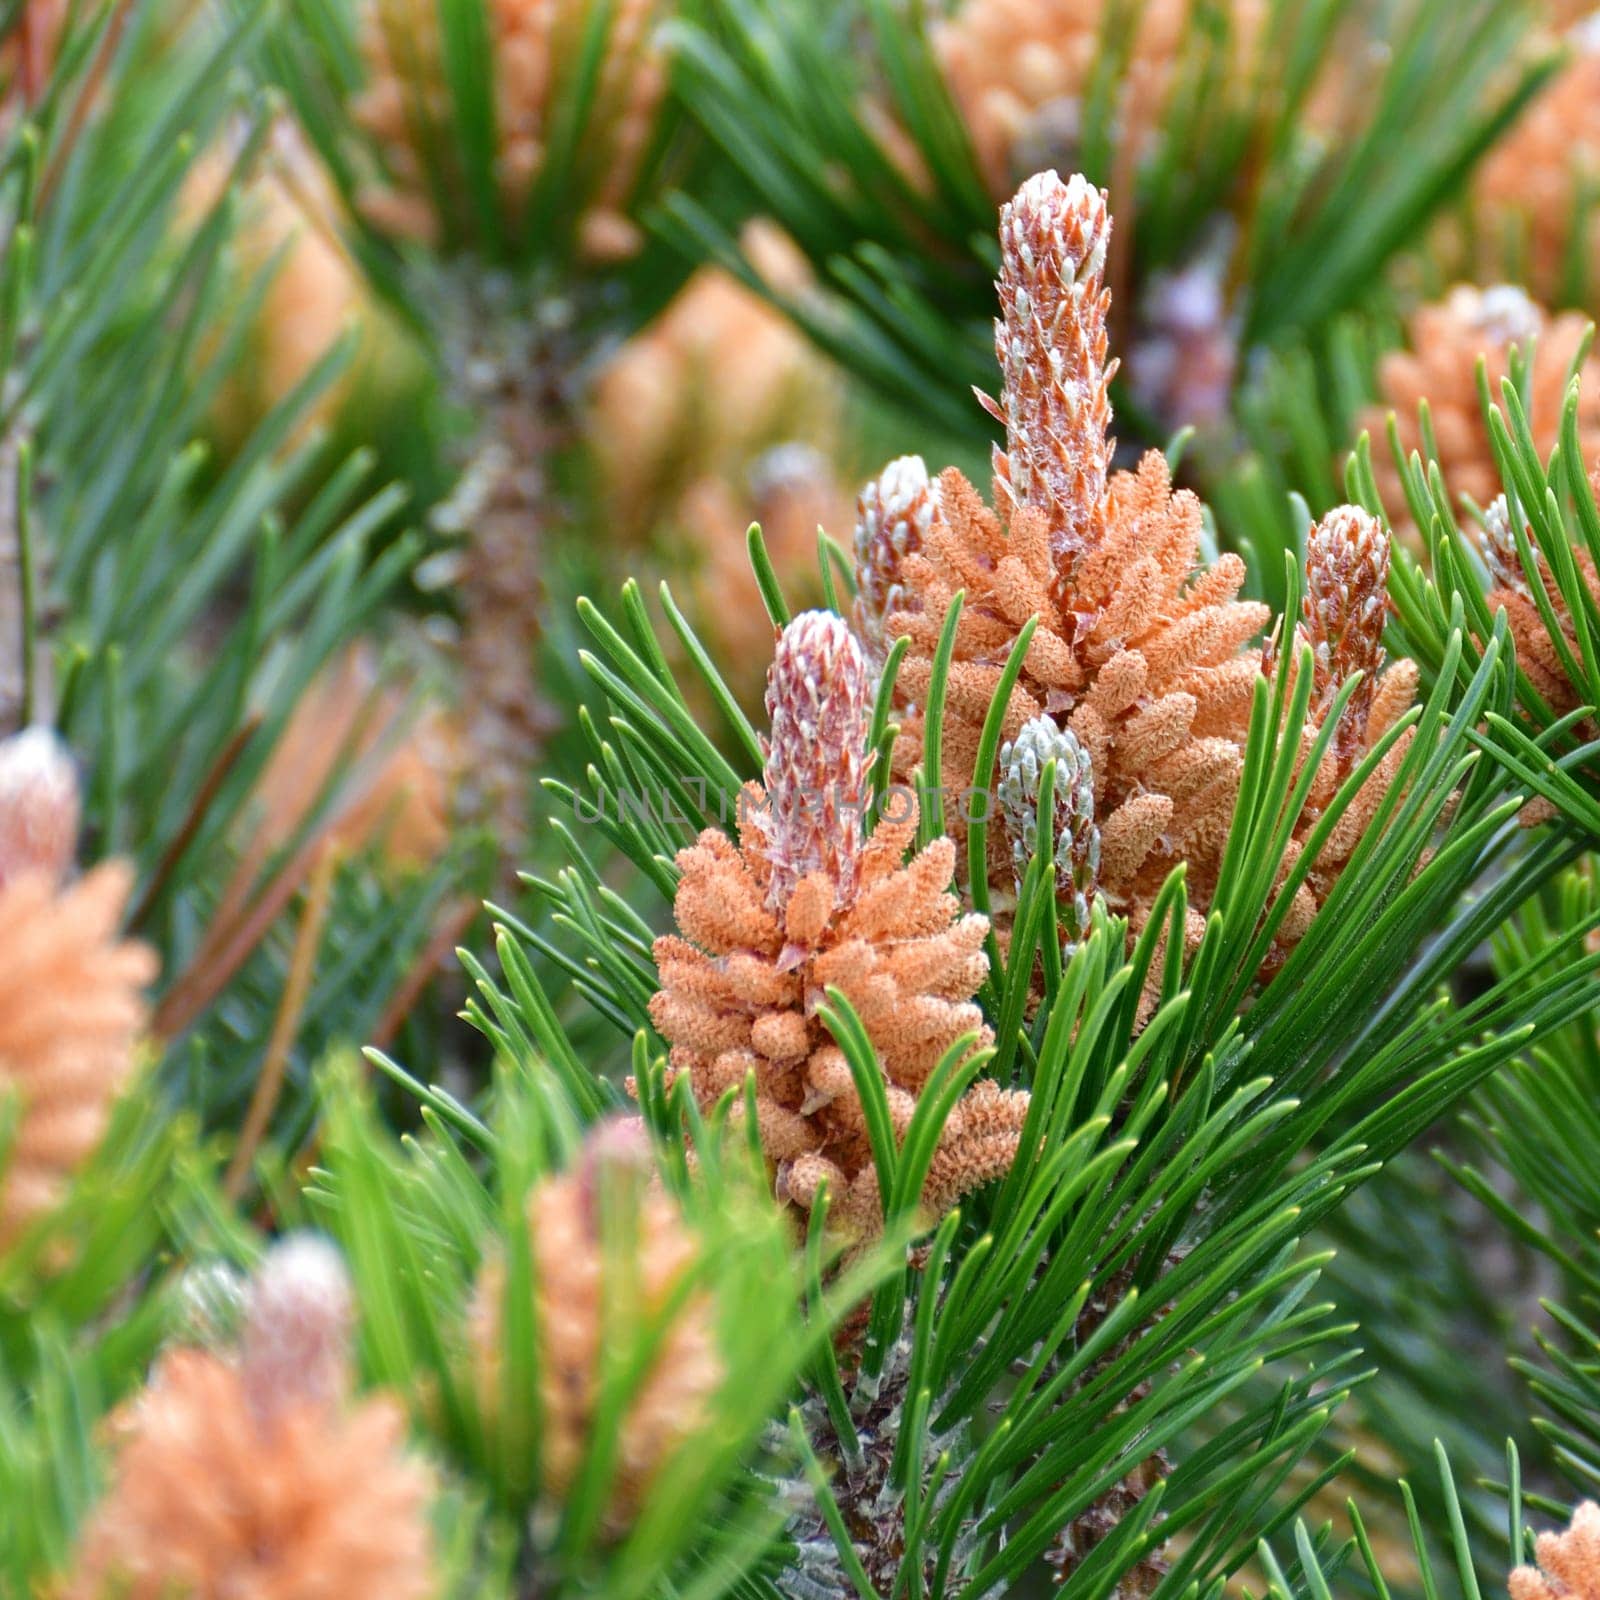 Mountain pine with cones in early spring by olgavolodina